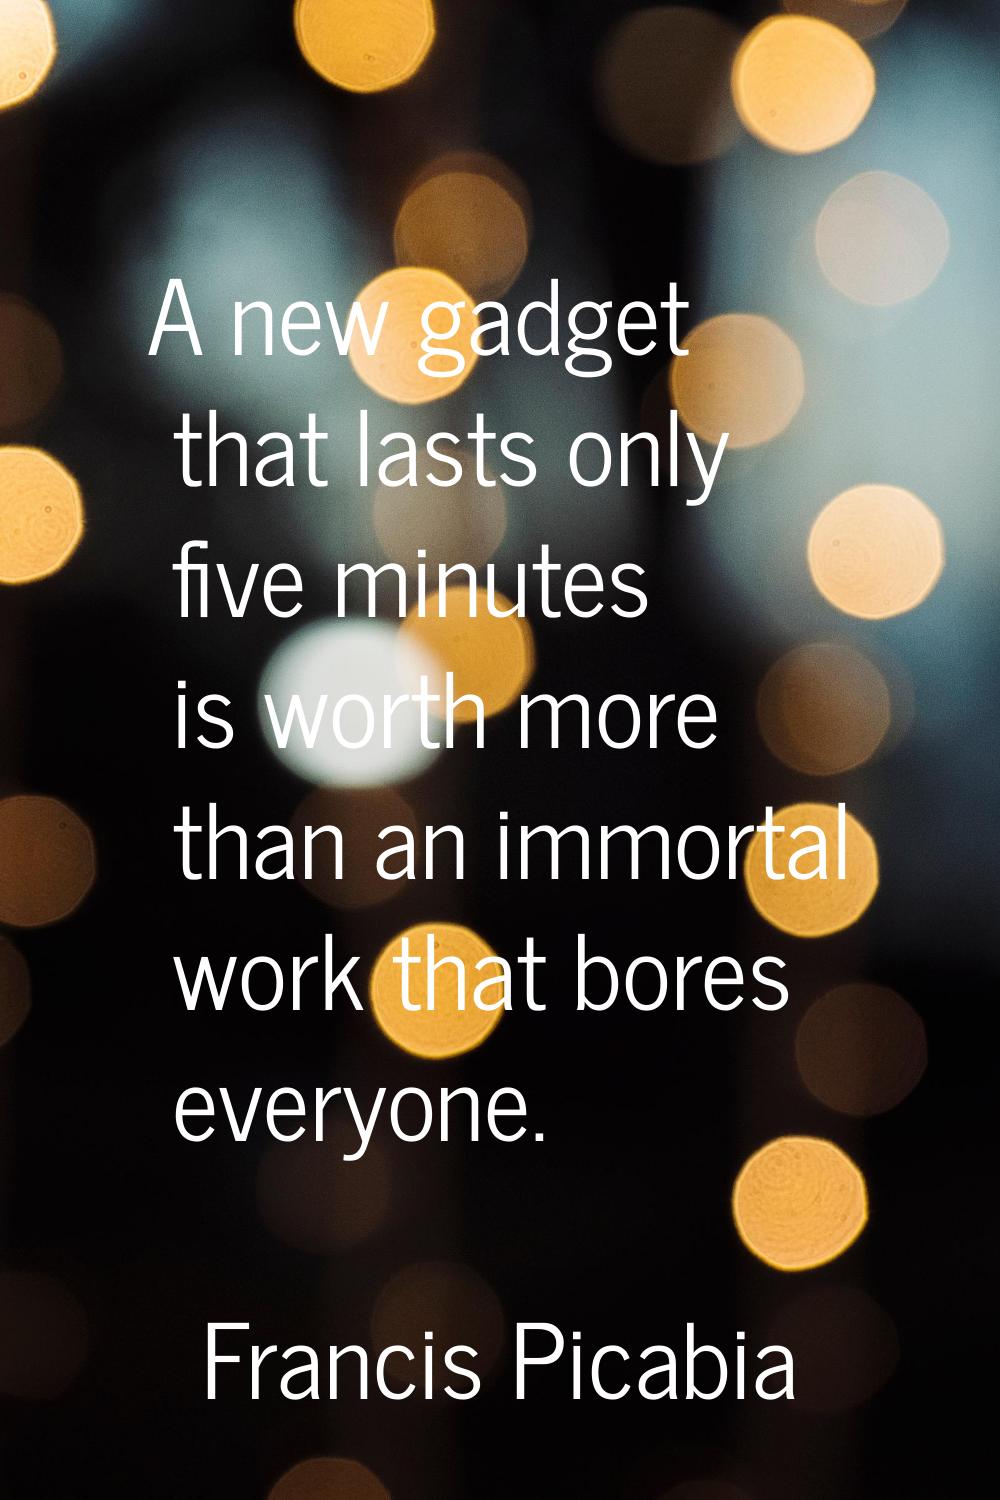 A new gadget that lasts only five minutes is worth more than an immortal work that bores everyone.